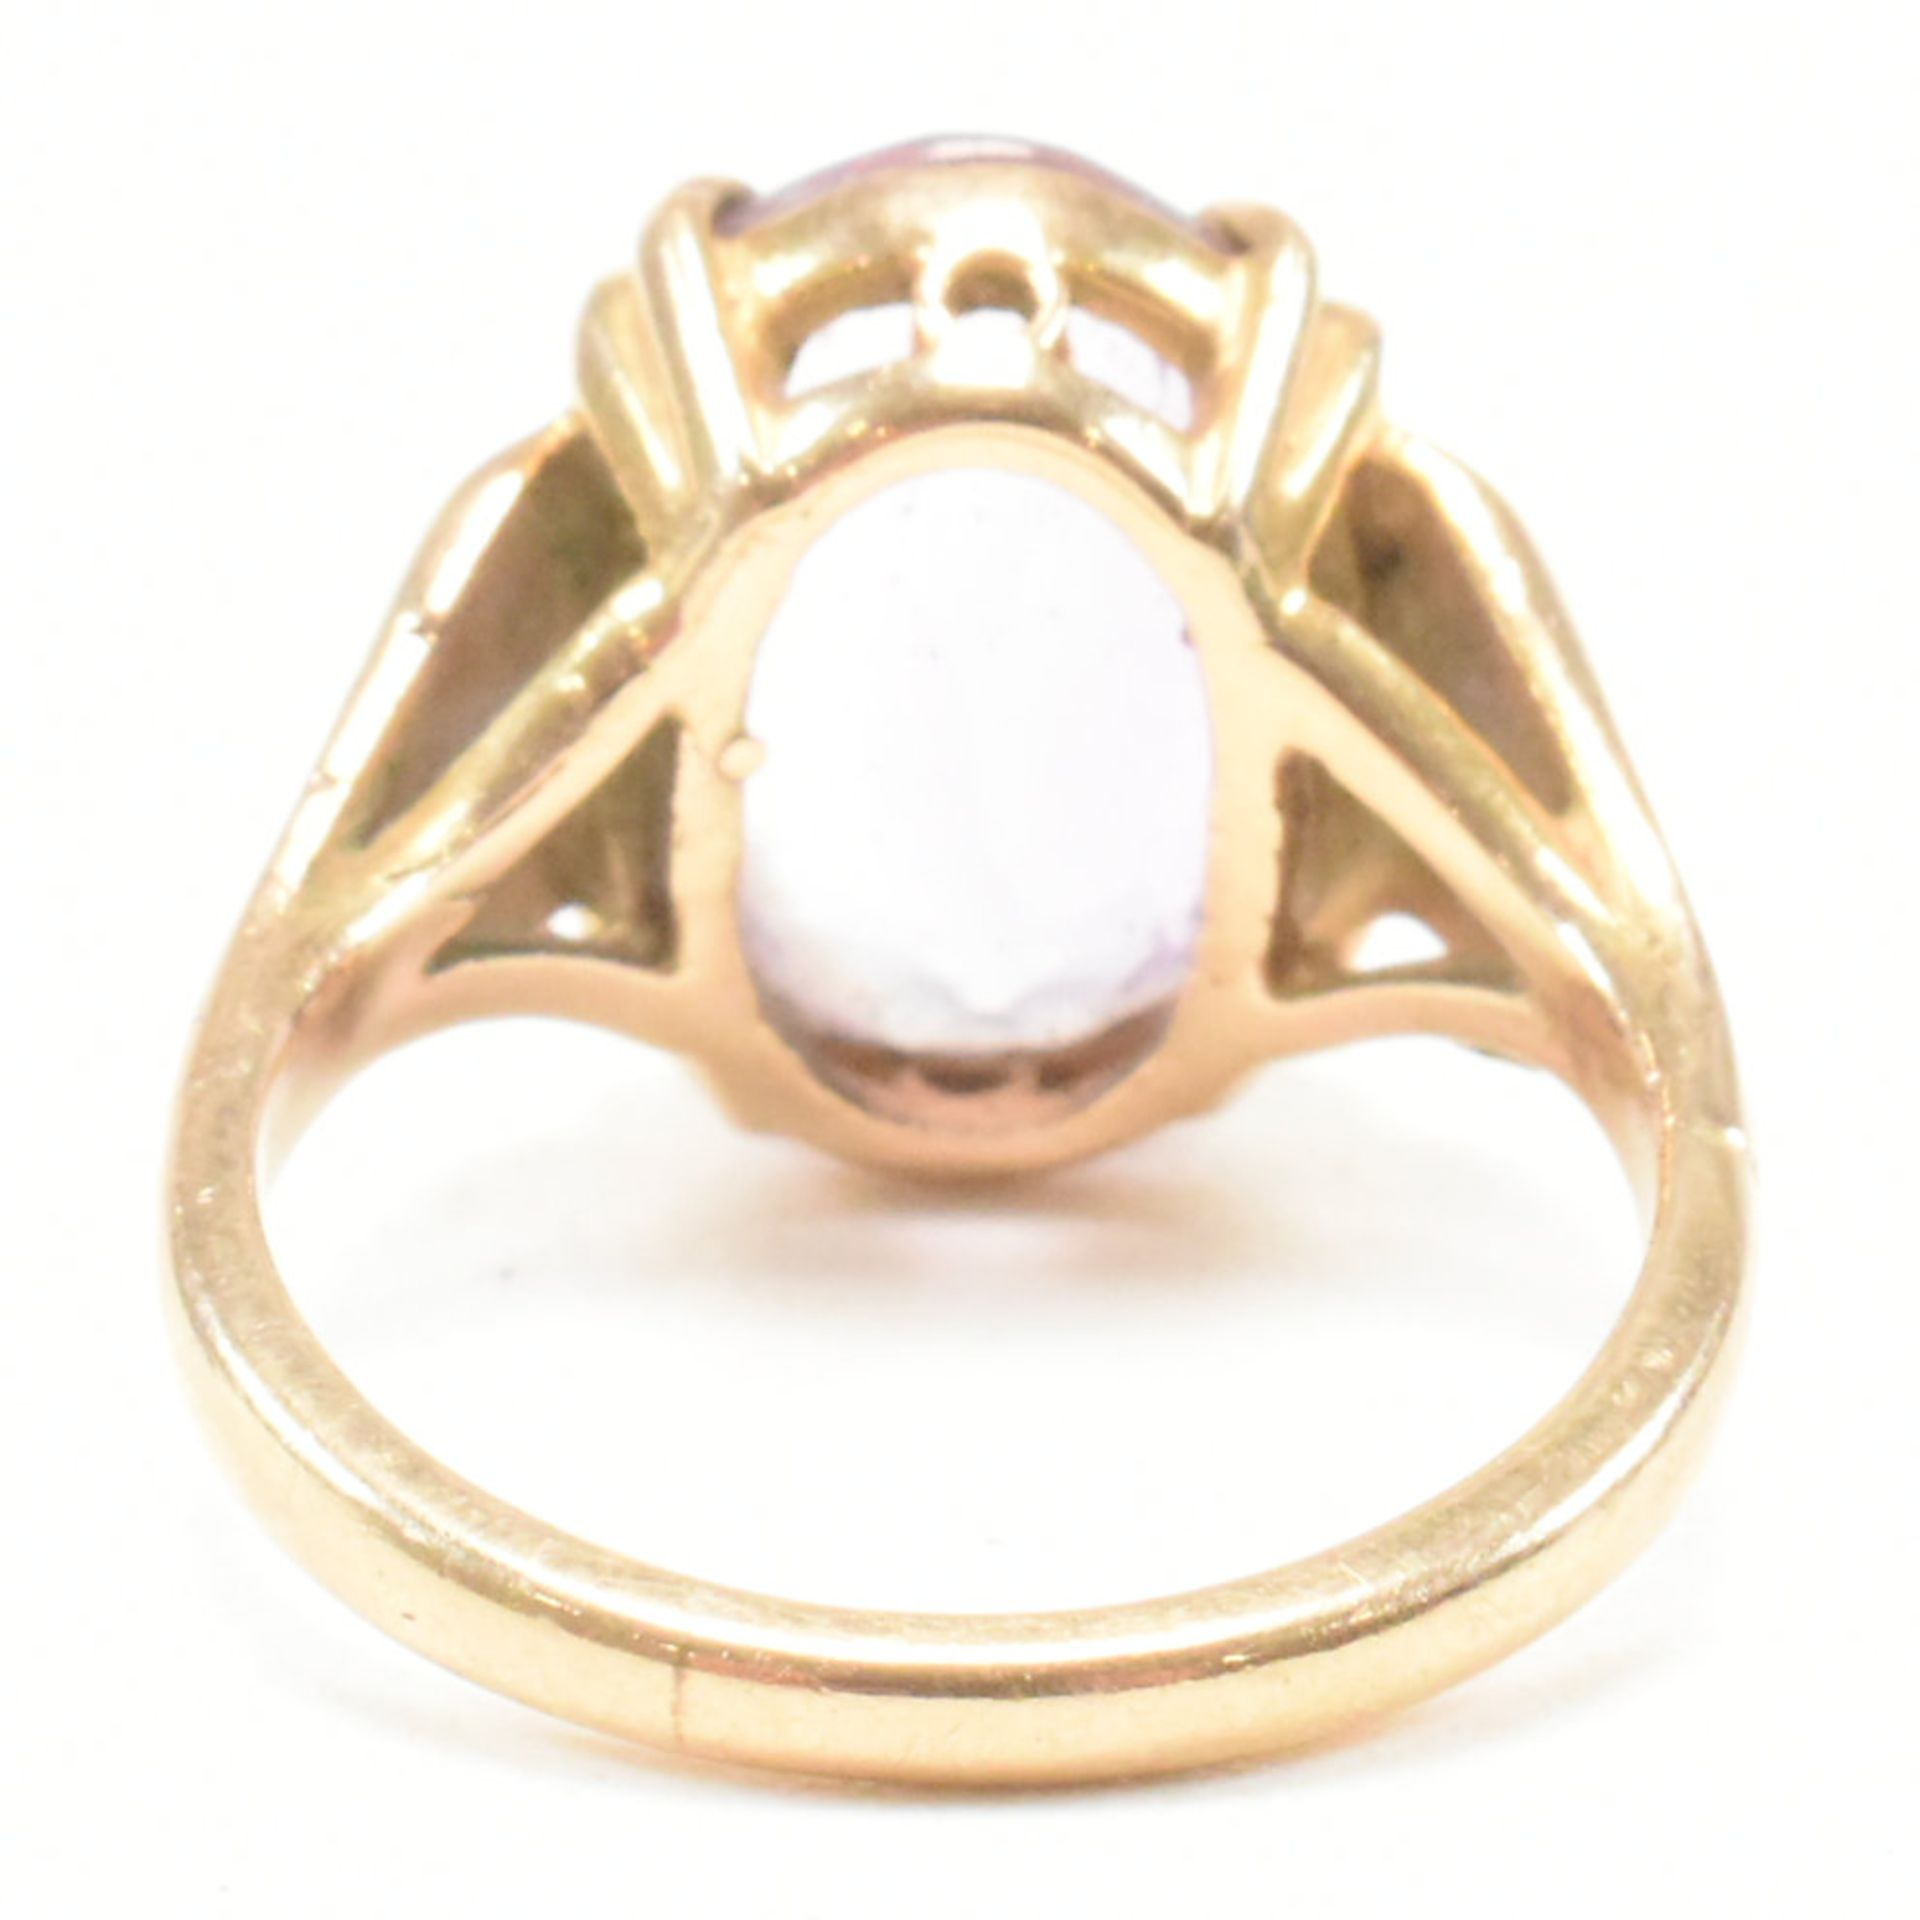 VINTAGE HALLMARKED 9CT GOLD & AMETHYST SOLITAIRE RING - Image 3 of 9